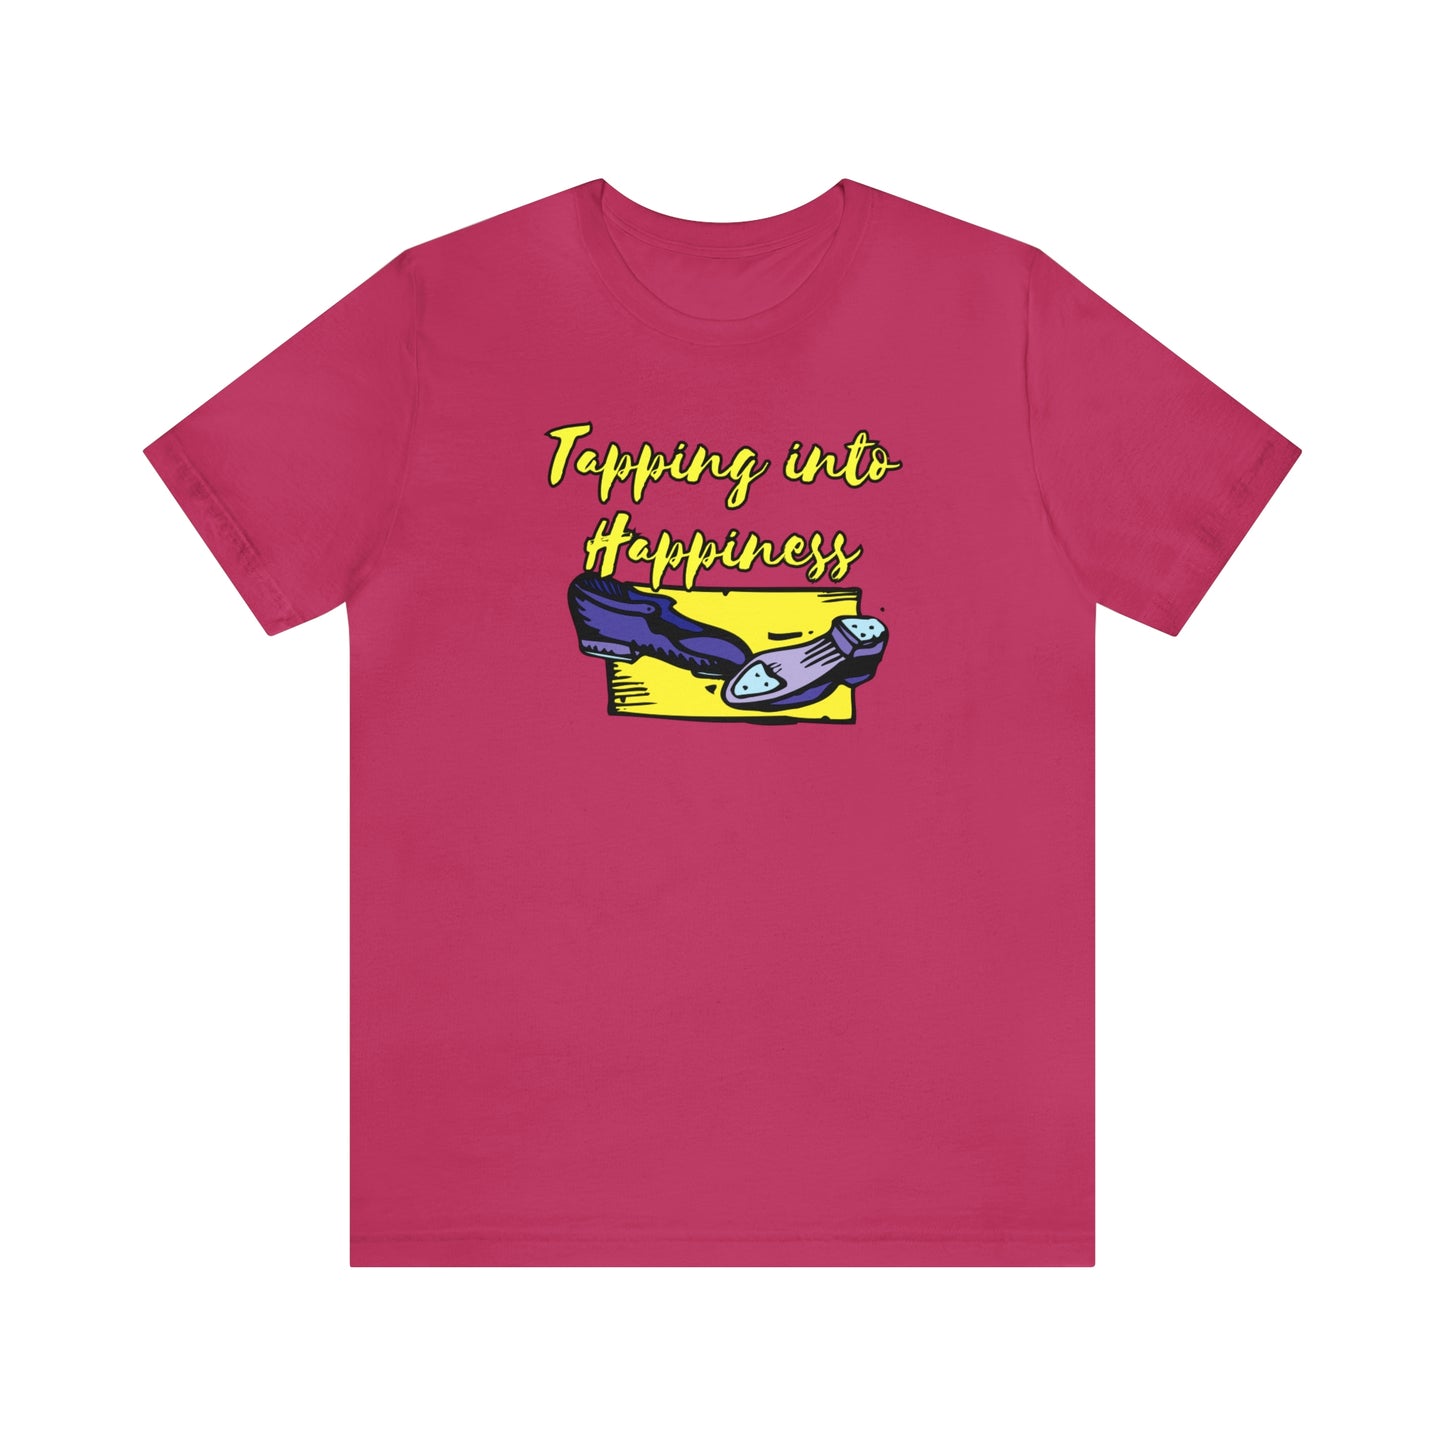 Unisex Tee - Tapping Into